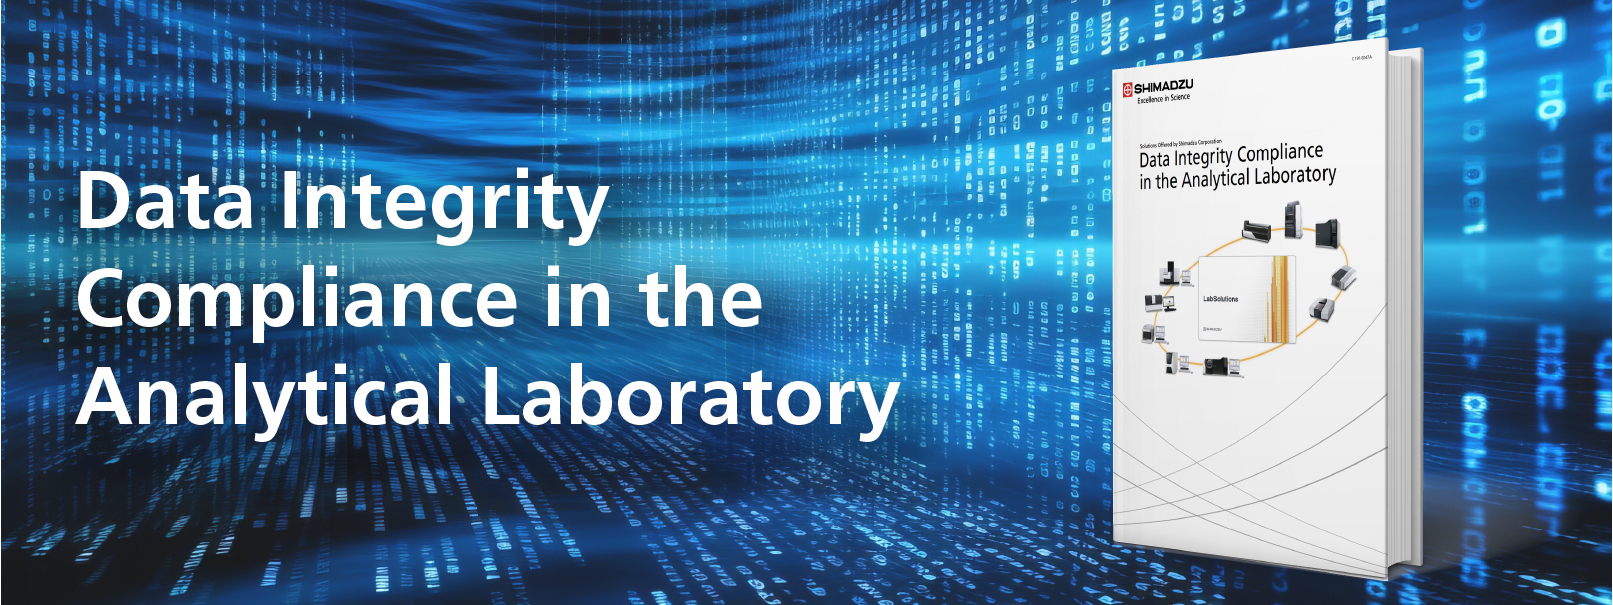 Data Integrity Compliance in the Analytical Laboratory